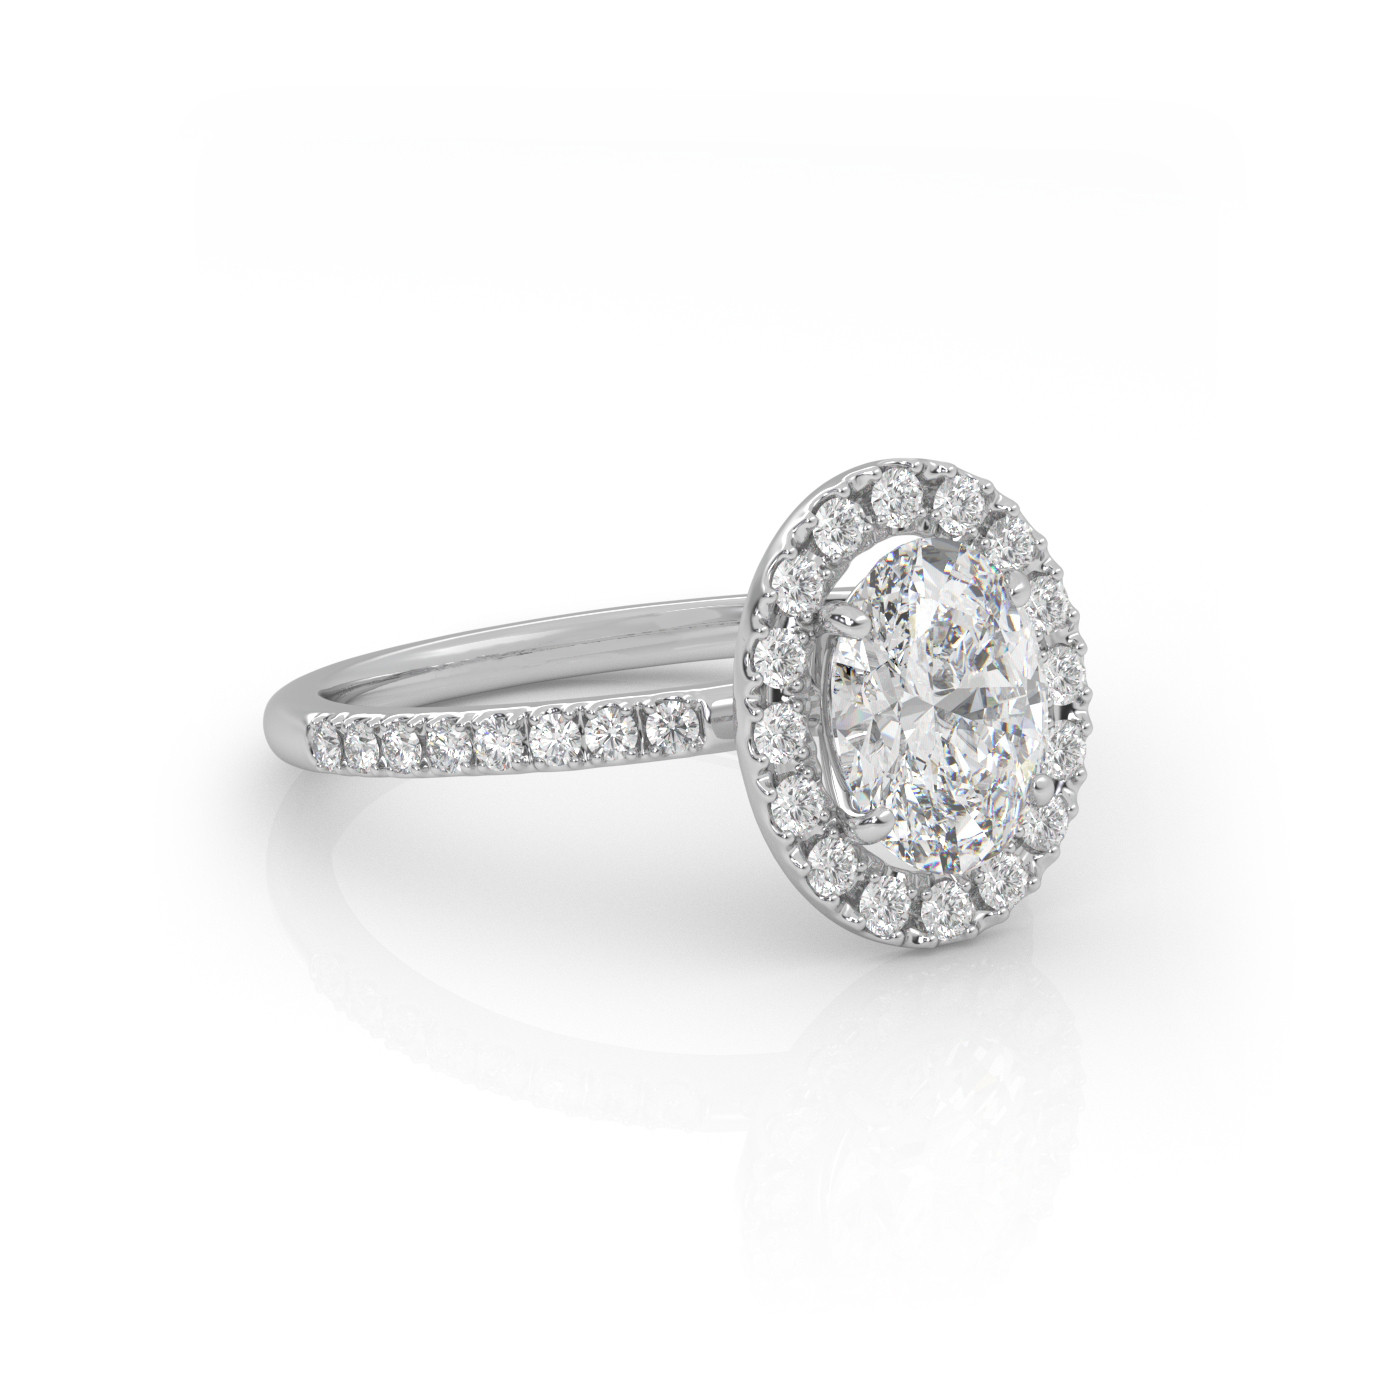 18K WHITE GOLD Oval Diamond Engagament Ring With Halo and Pave style